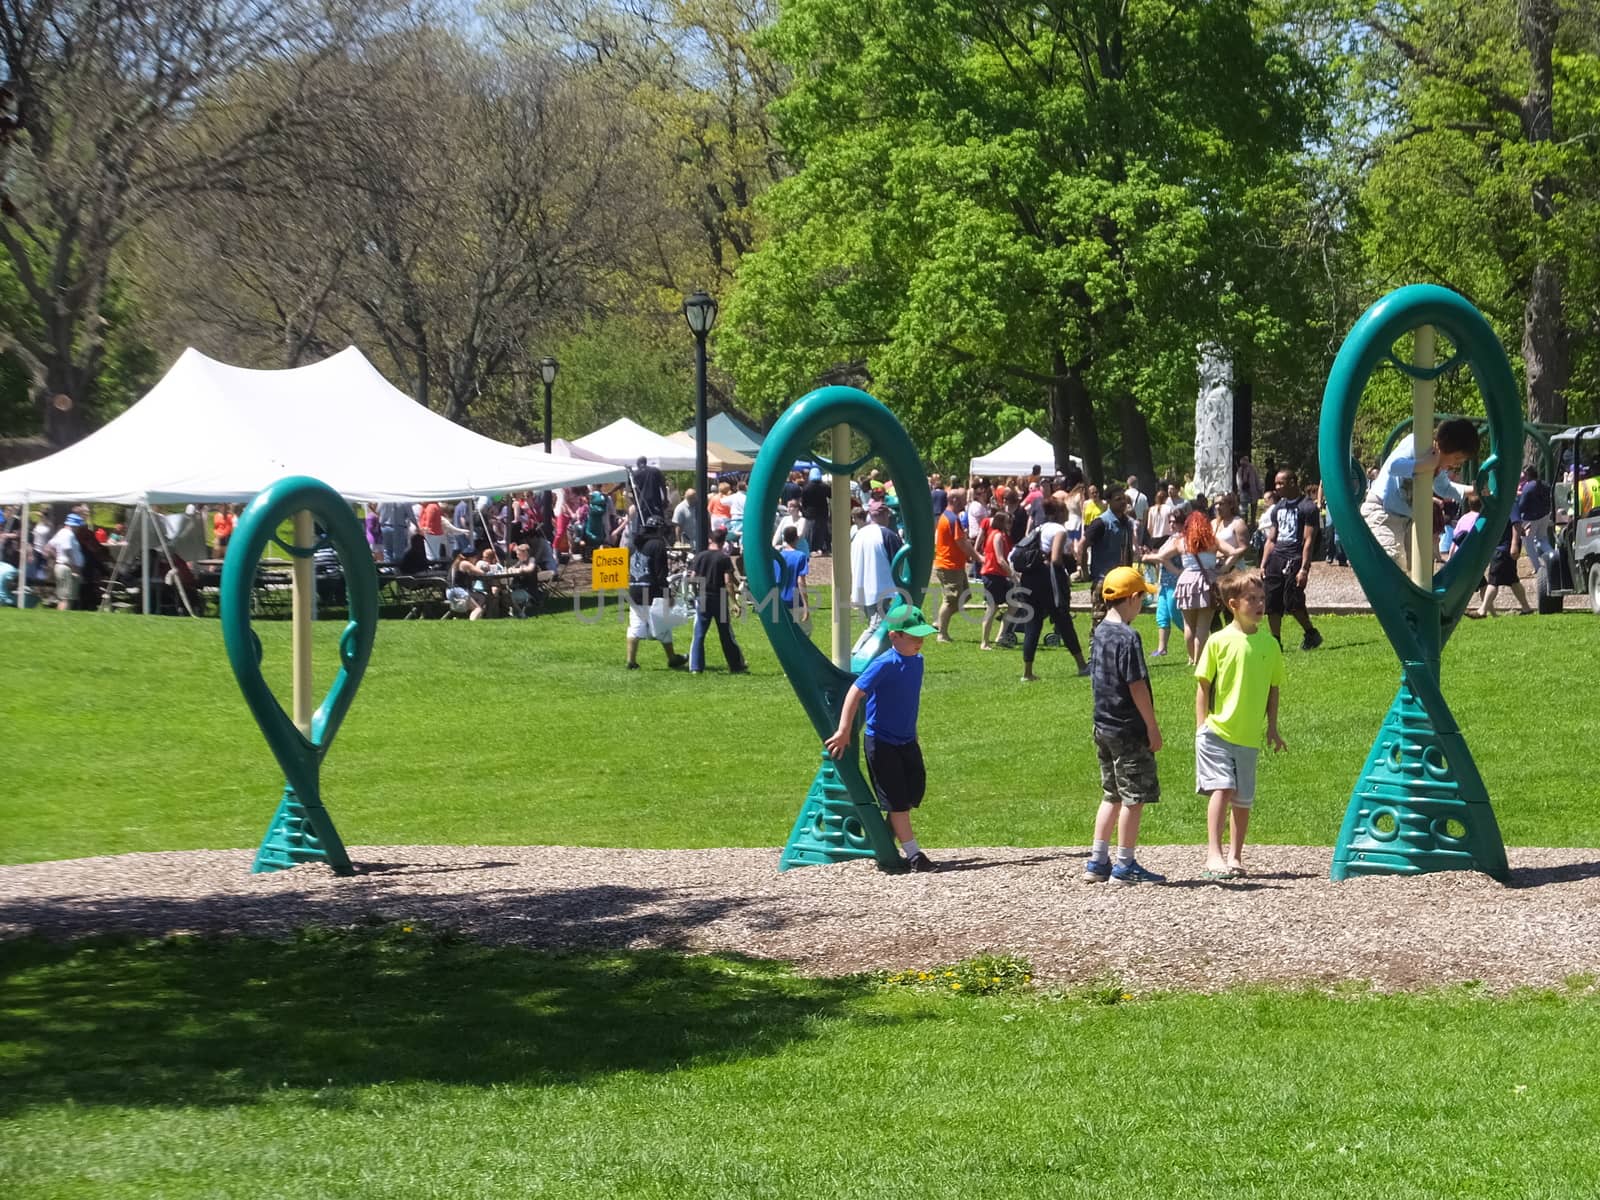 Playground at the 2014 Tulip Festival at Washington Park in Albany, New York State